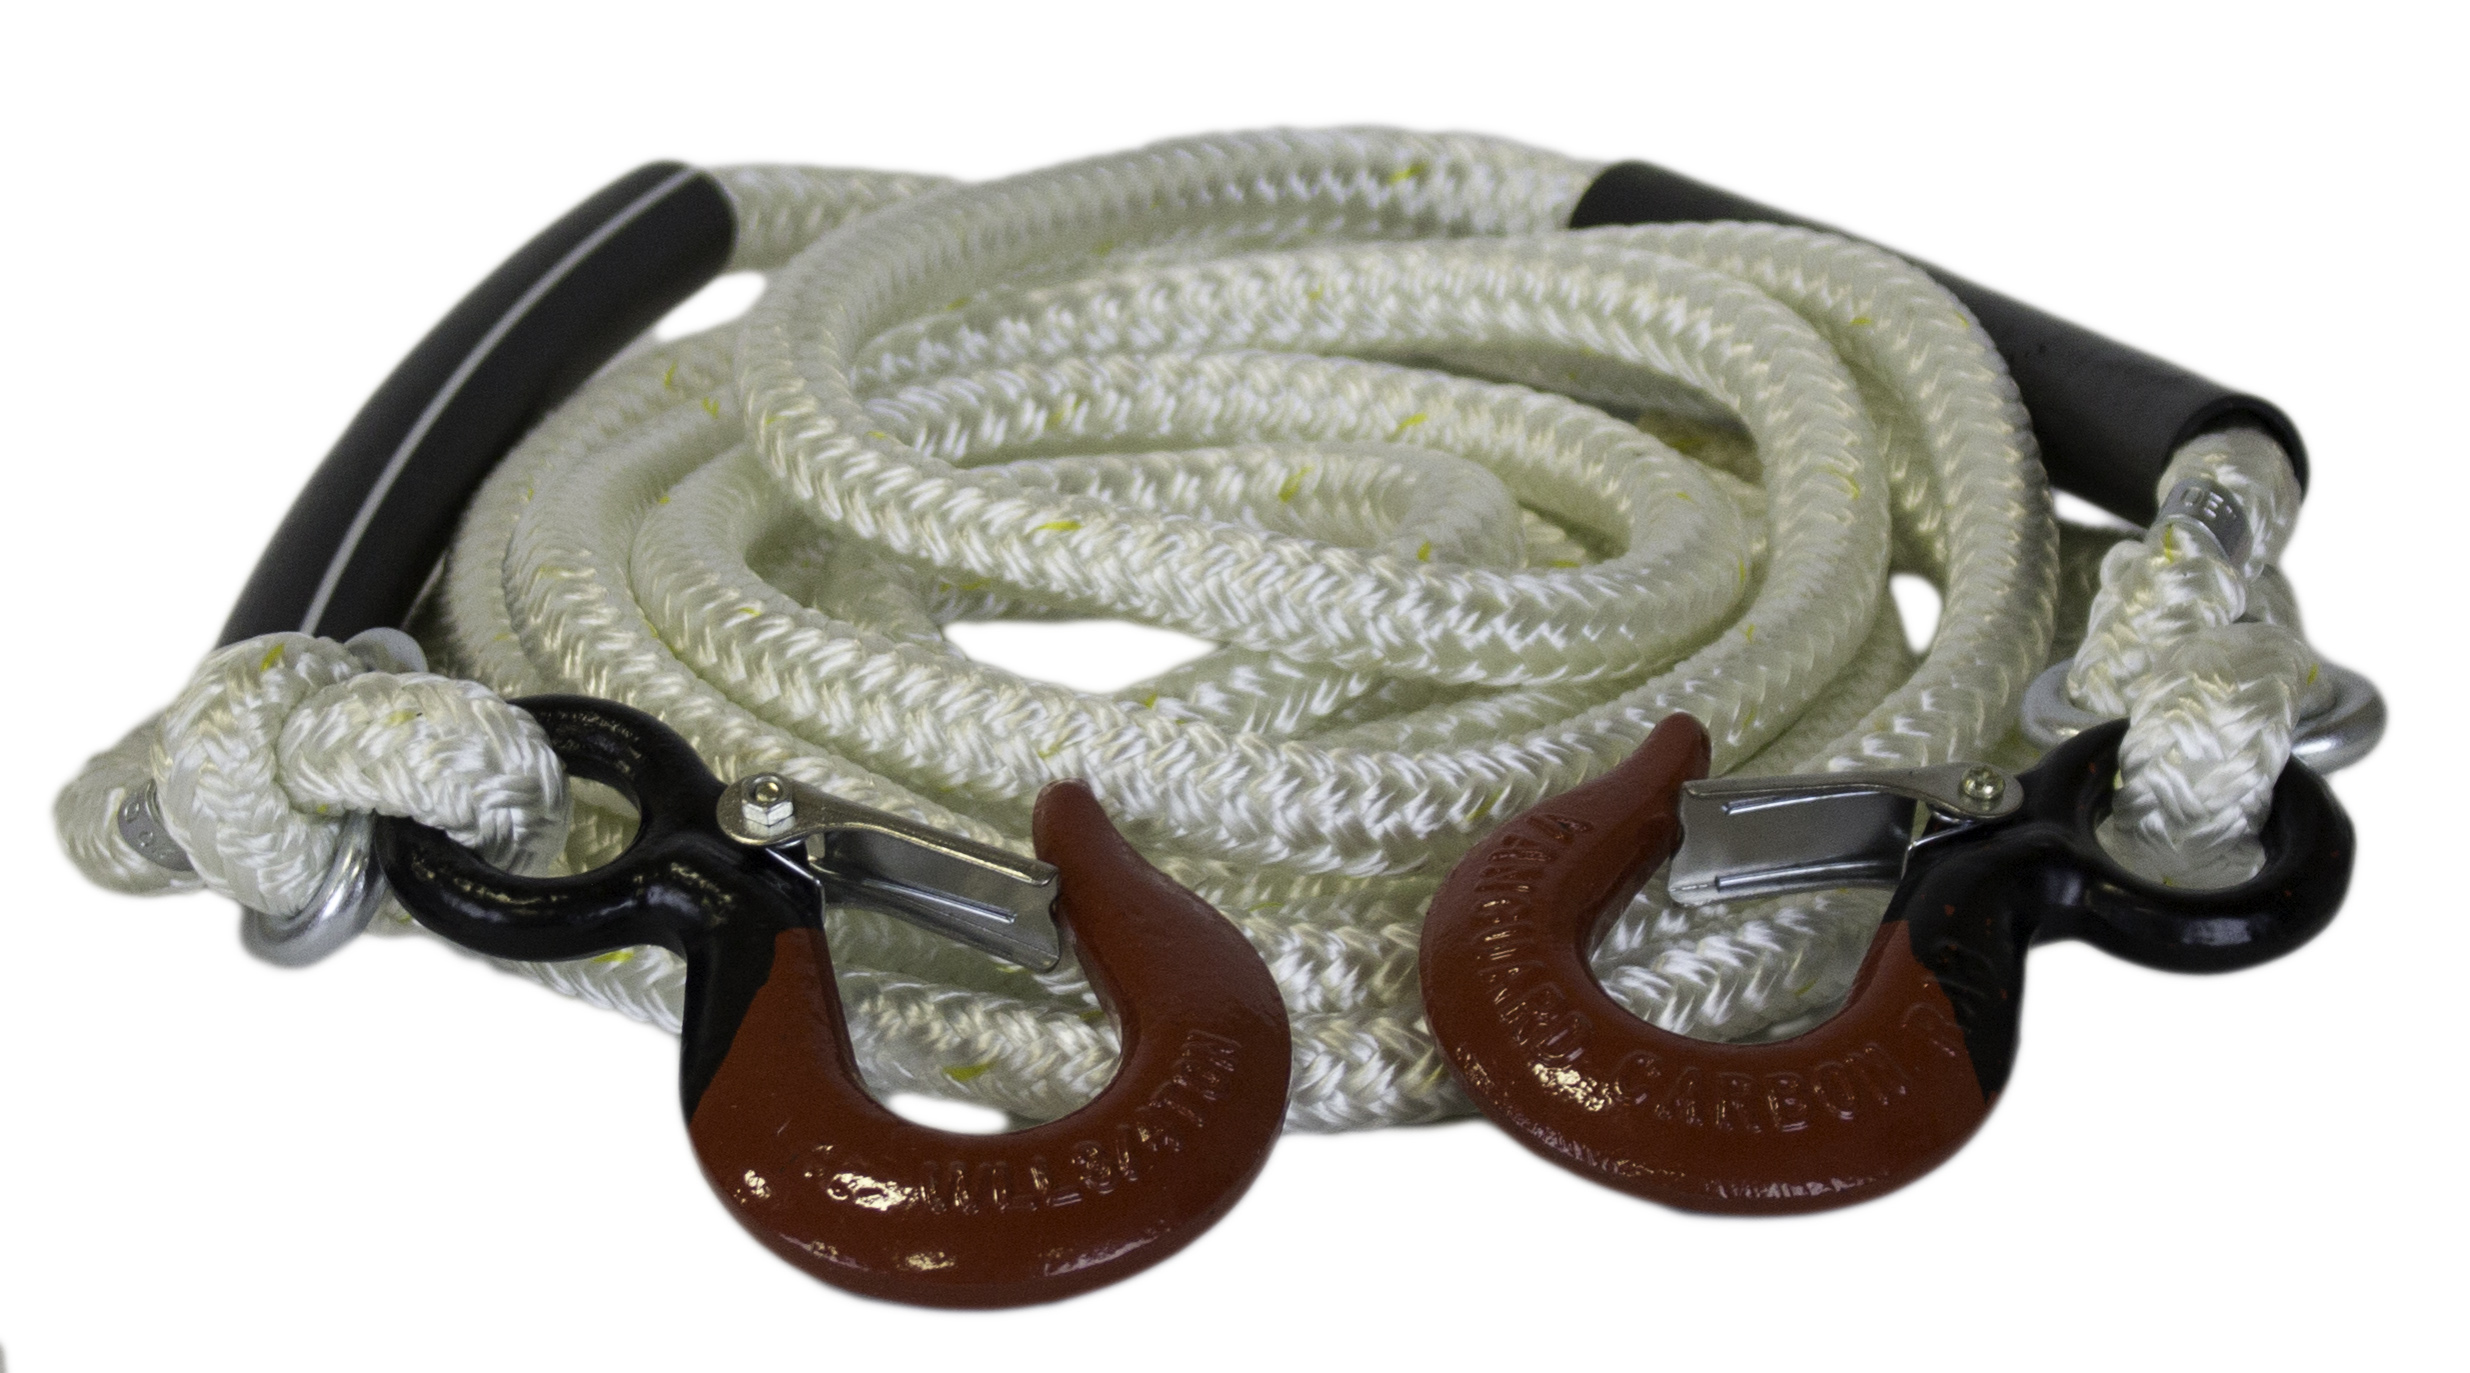 kinetic energy recovery rope